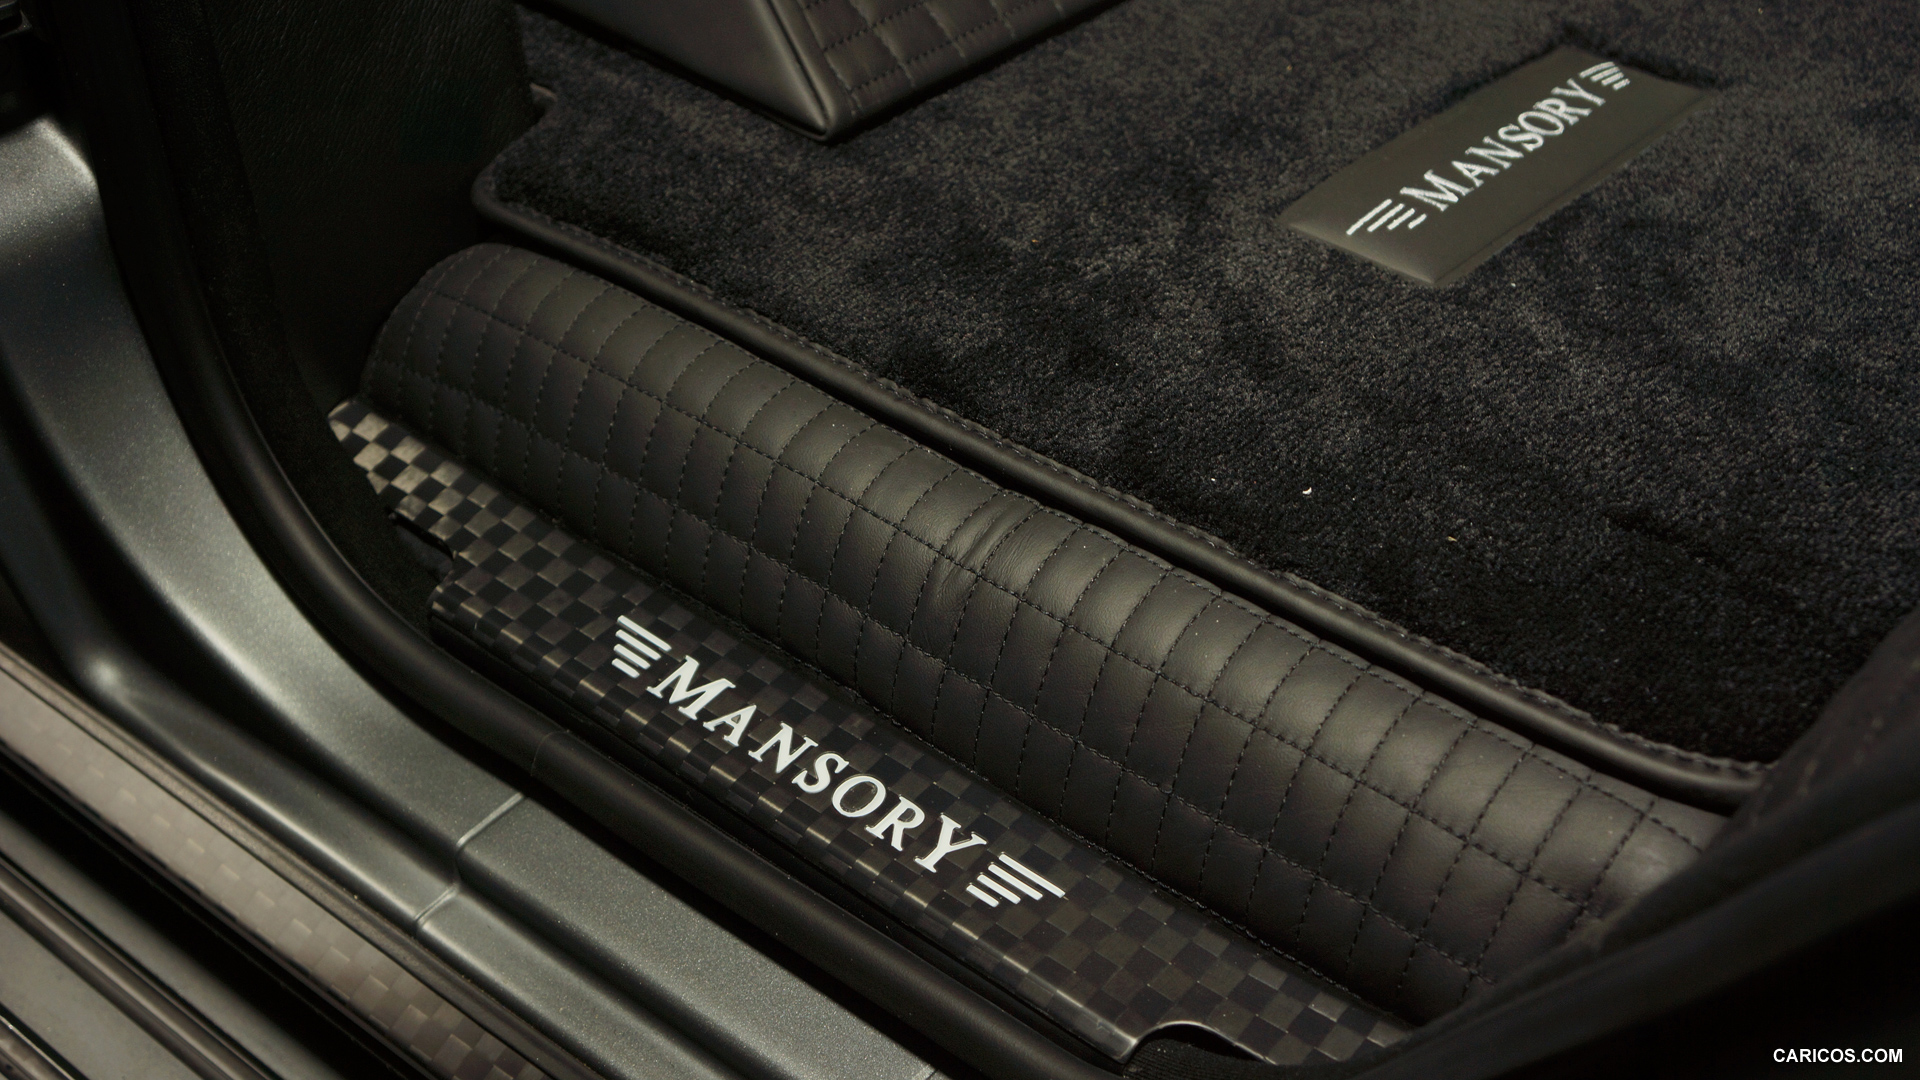 2014 Mansory Gronos based on Mercedes-Benz G-Class AMG  - Door Sill, #5 of 6